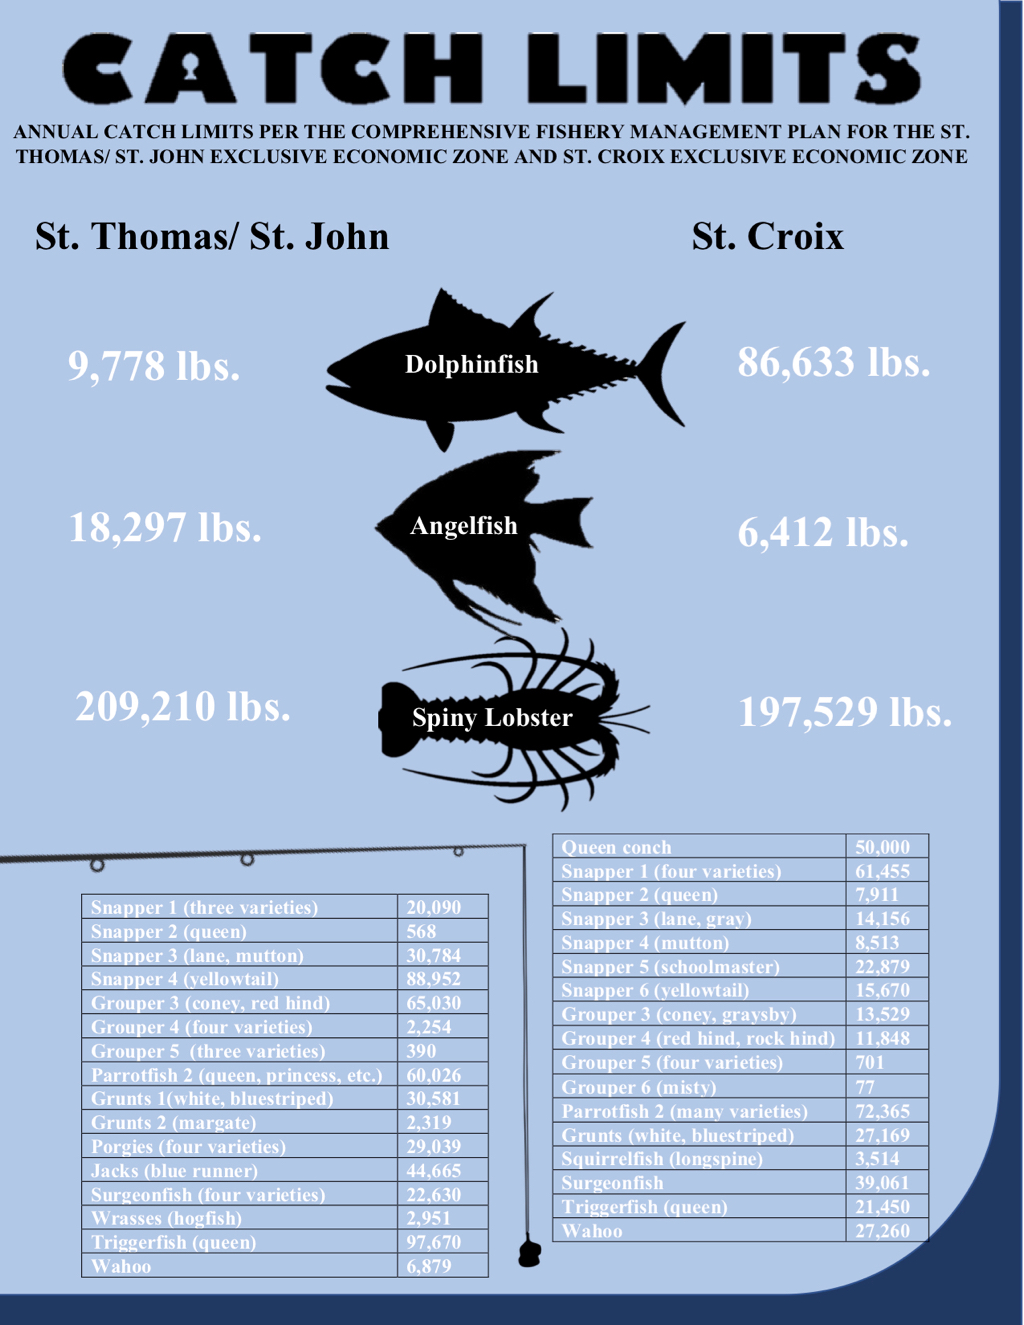 V.I. Caribbean Fishery Management Council proposes new catch limits for each jurisdiction. (Graphic by Bethaney Lee)